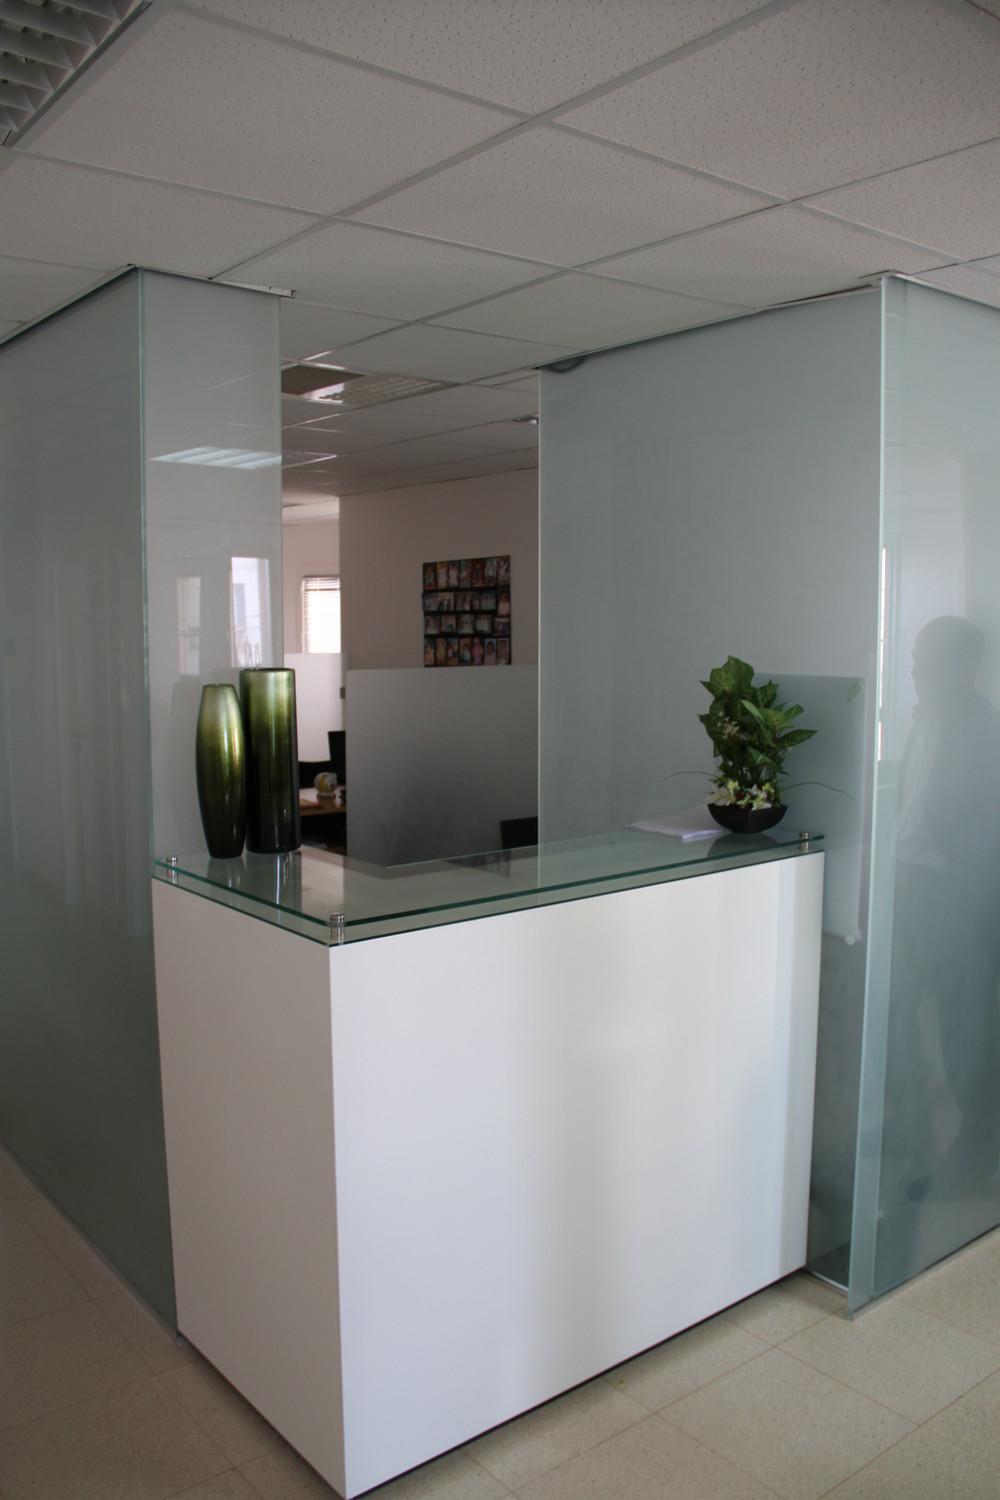 View of the reception desk